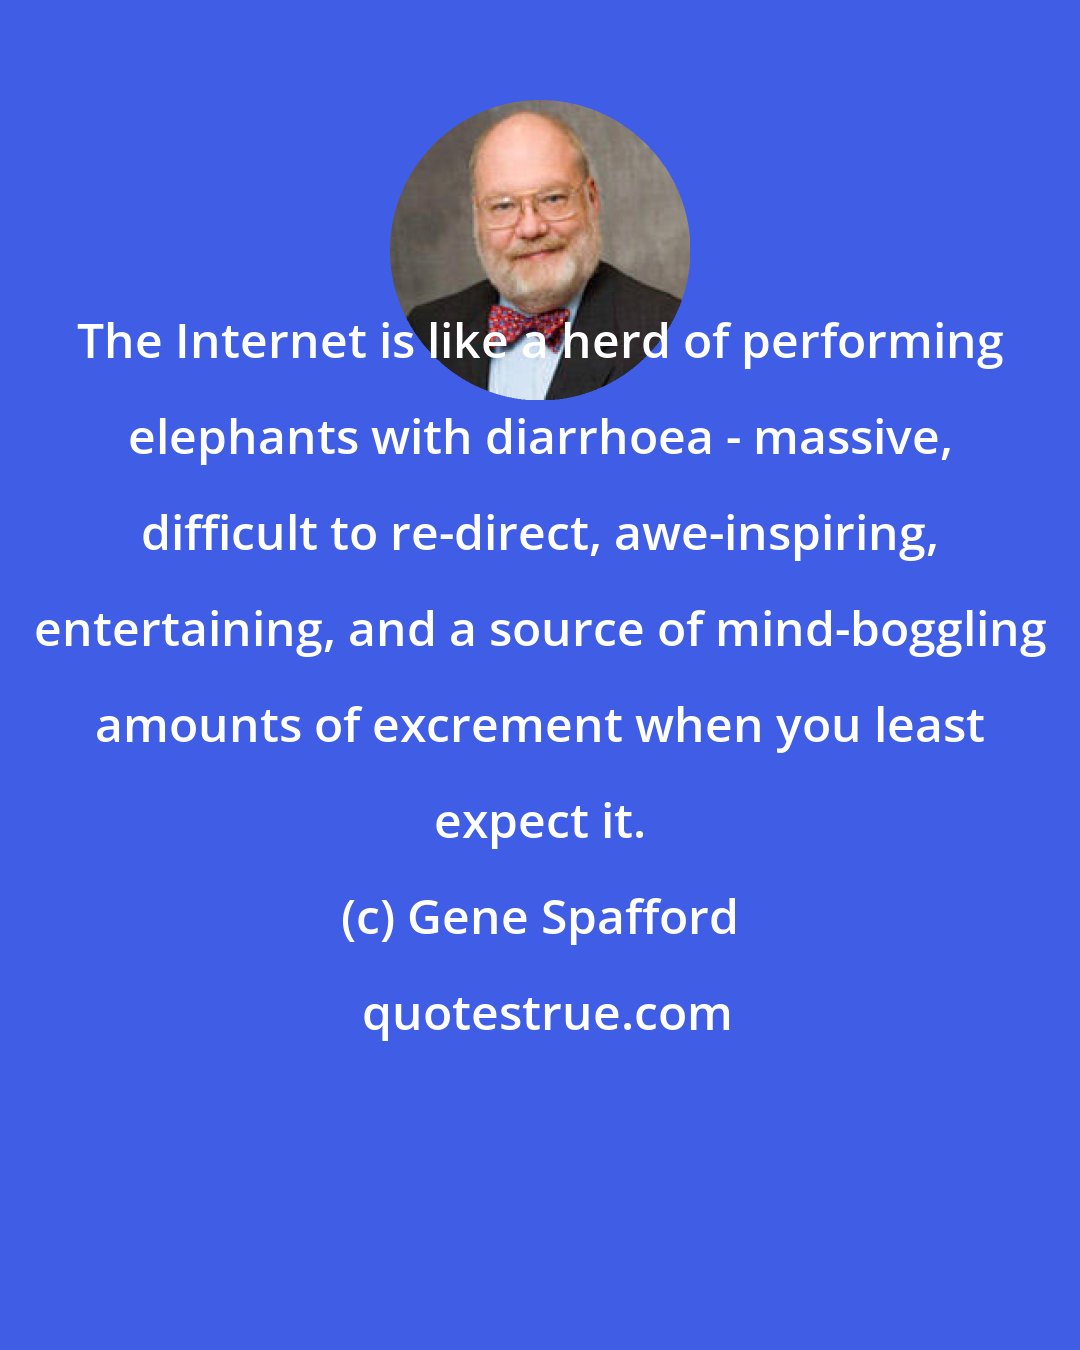 Gene Spafford: The Internet is like a herd of performing elephants with diarrhoea - massive, difficult to re-direct, awe-inspiring, entertaining, and a source of mind-boggling amounts of excrement when you least expect it.